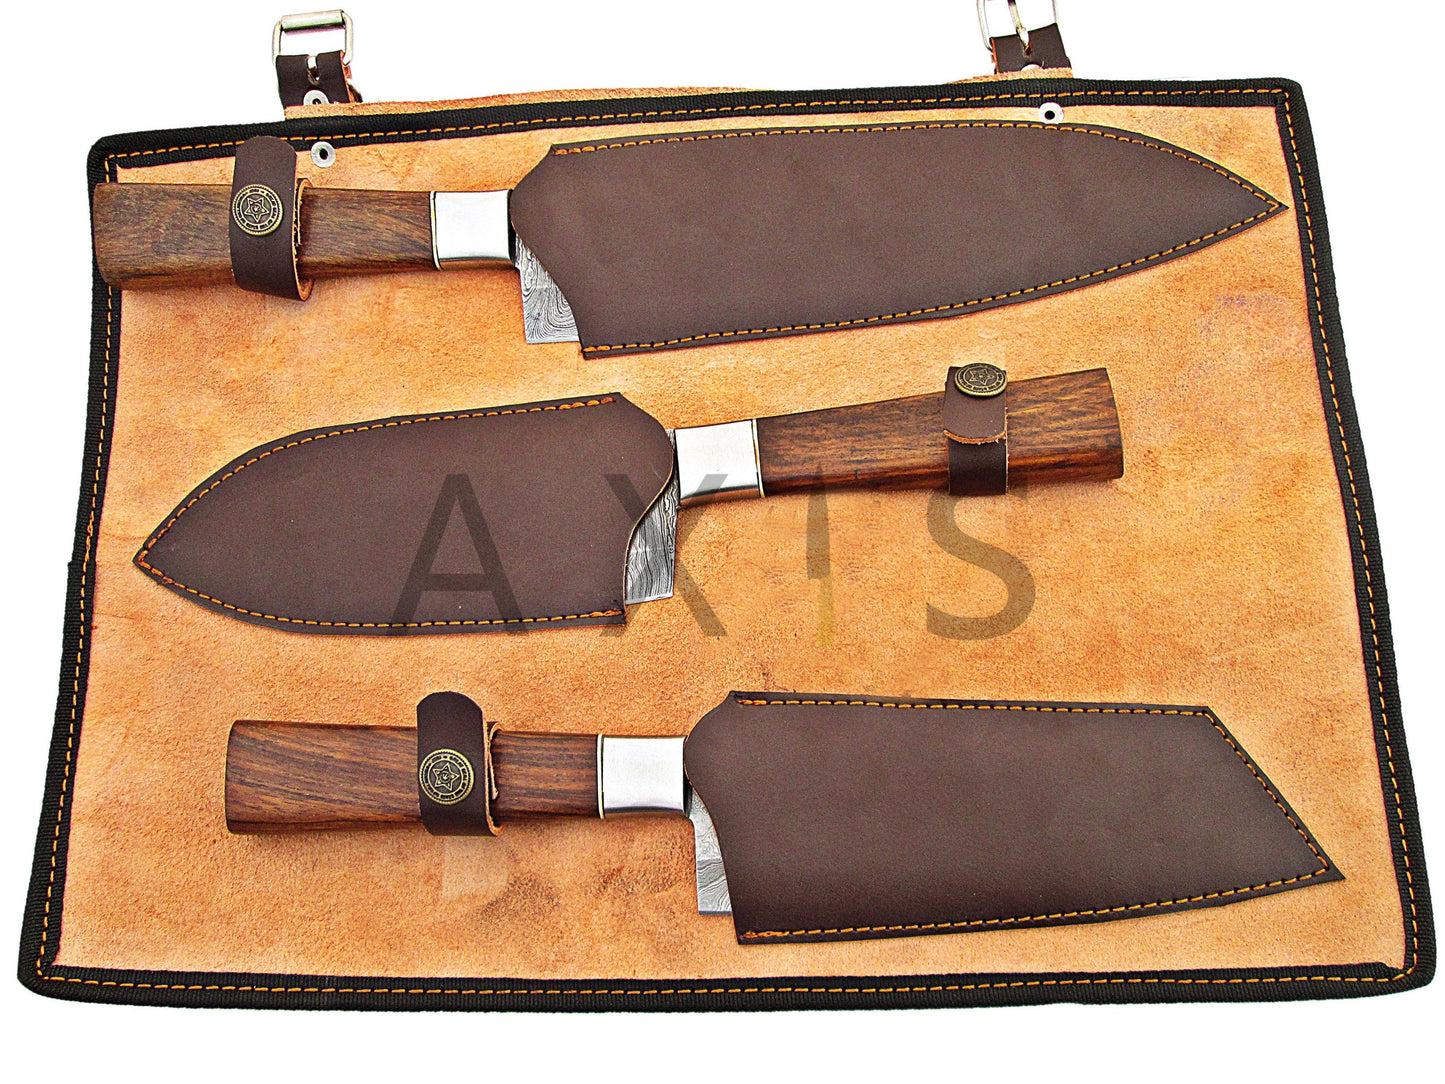 Damascus Steel | Chef Knife Set | Handmade Kitchen Knives Set | Hand Forged Knife | Leather Roll | Unique Gift | Christmas & Anniversary Gift | AxisKnivesCompany